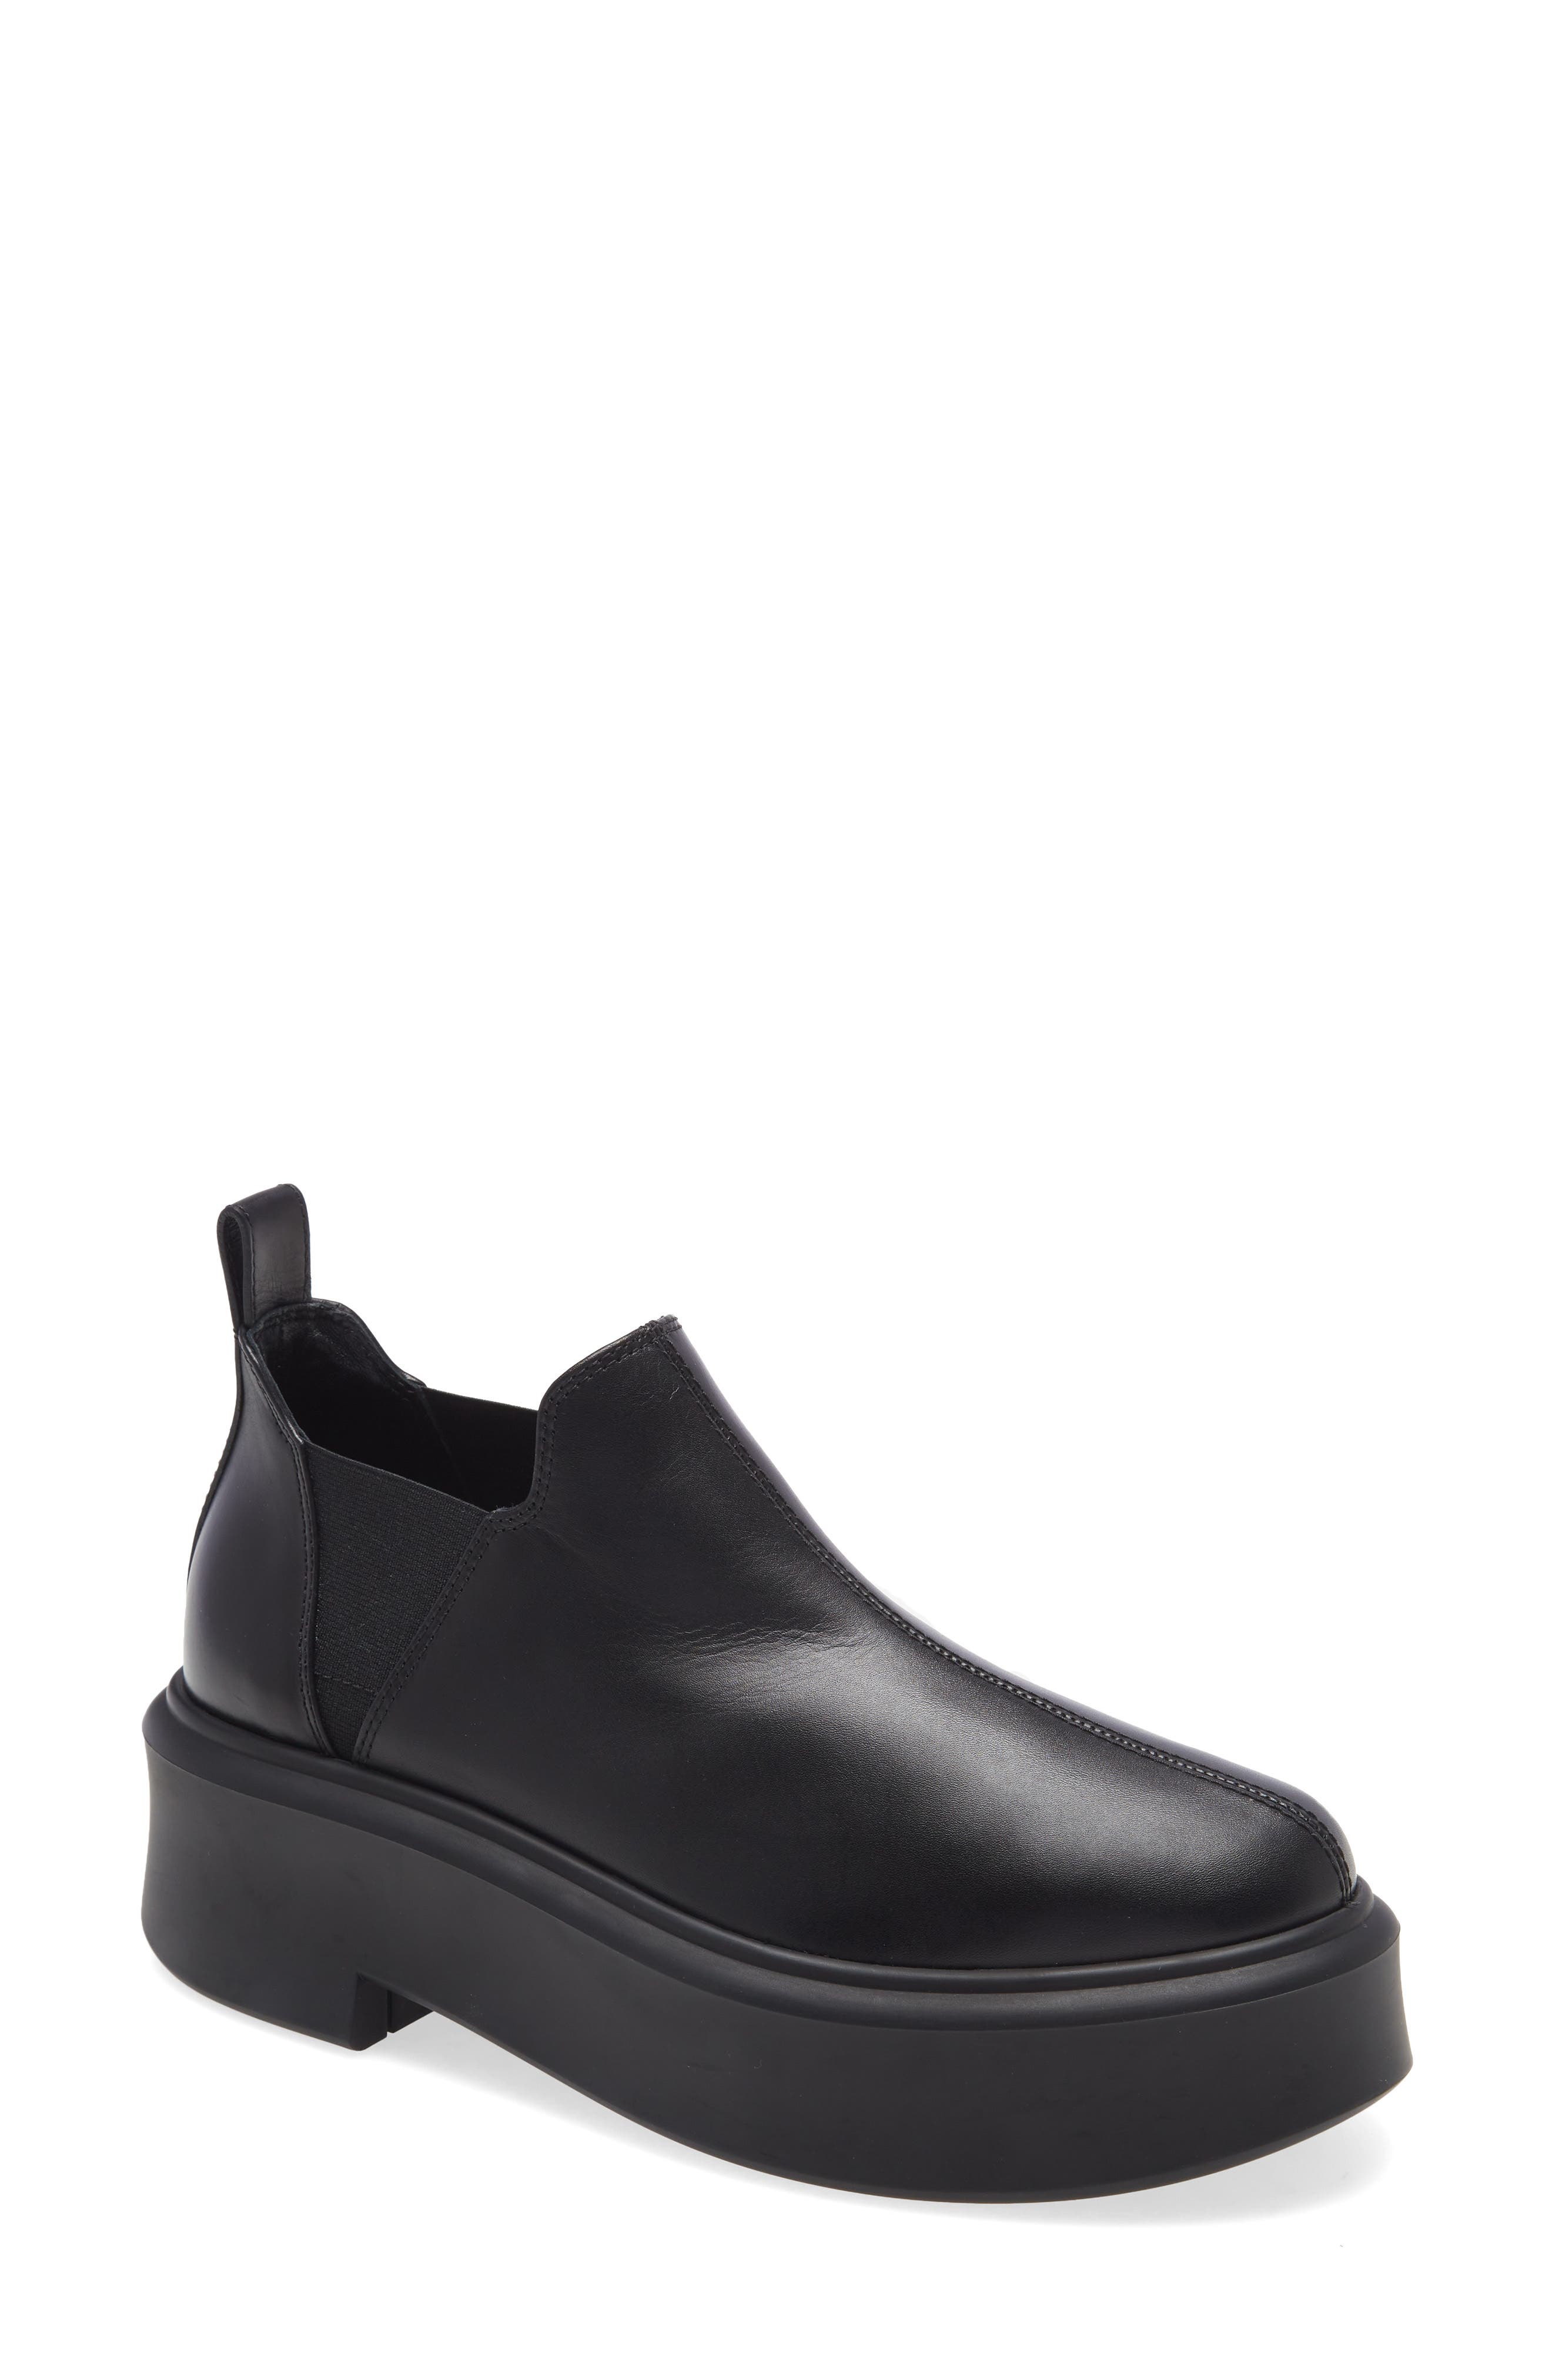 The Row Robin Chelsea Boot in Black at Nordstrom, Size 6.5Us